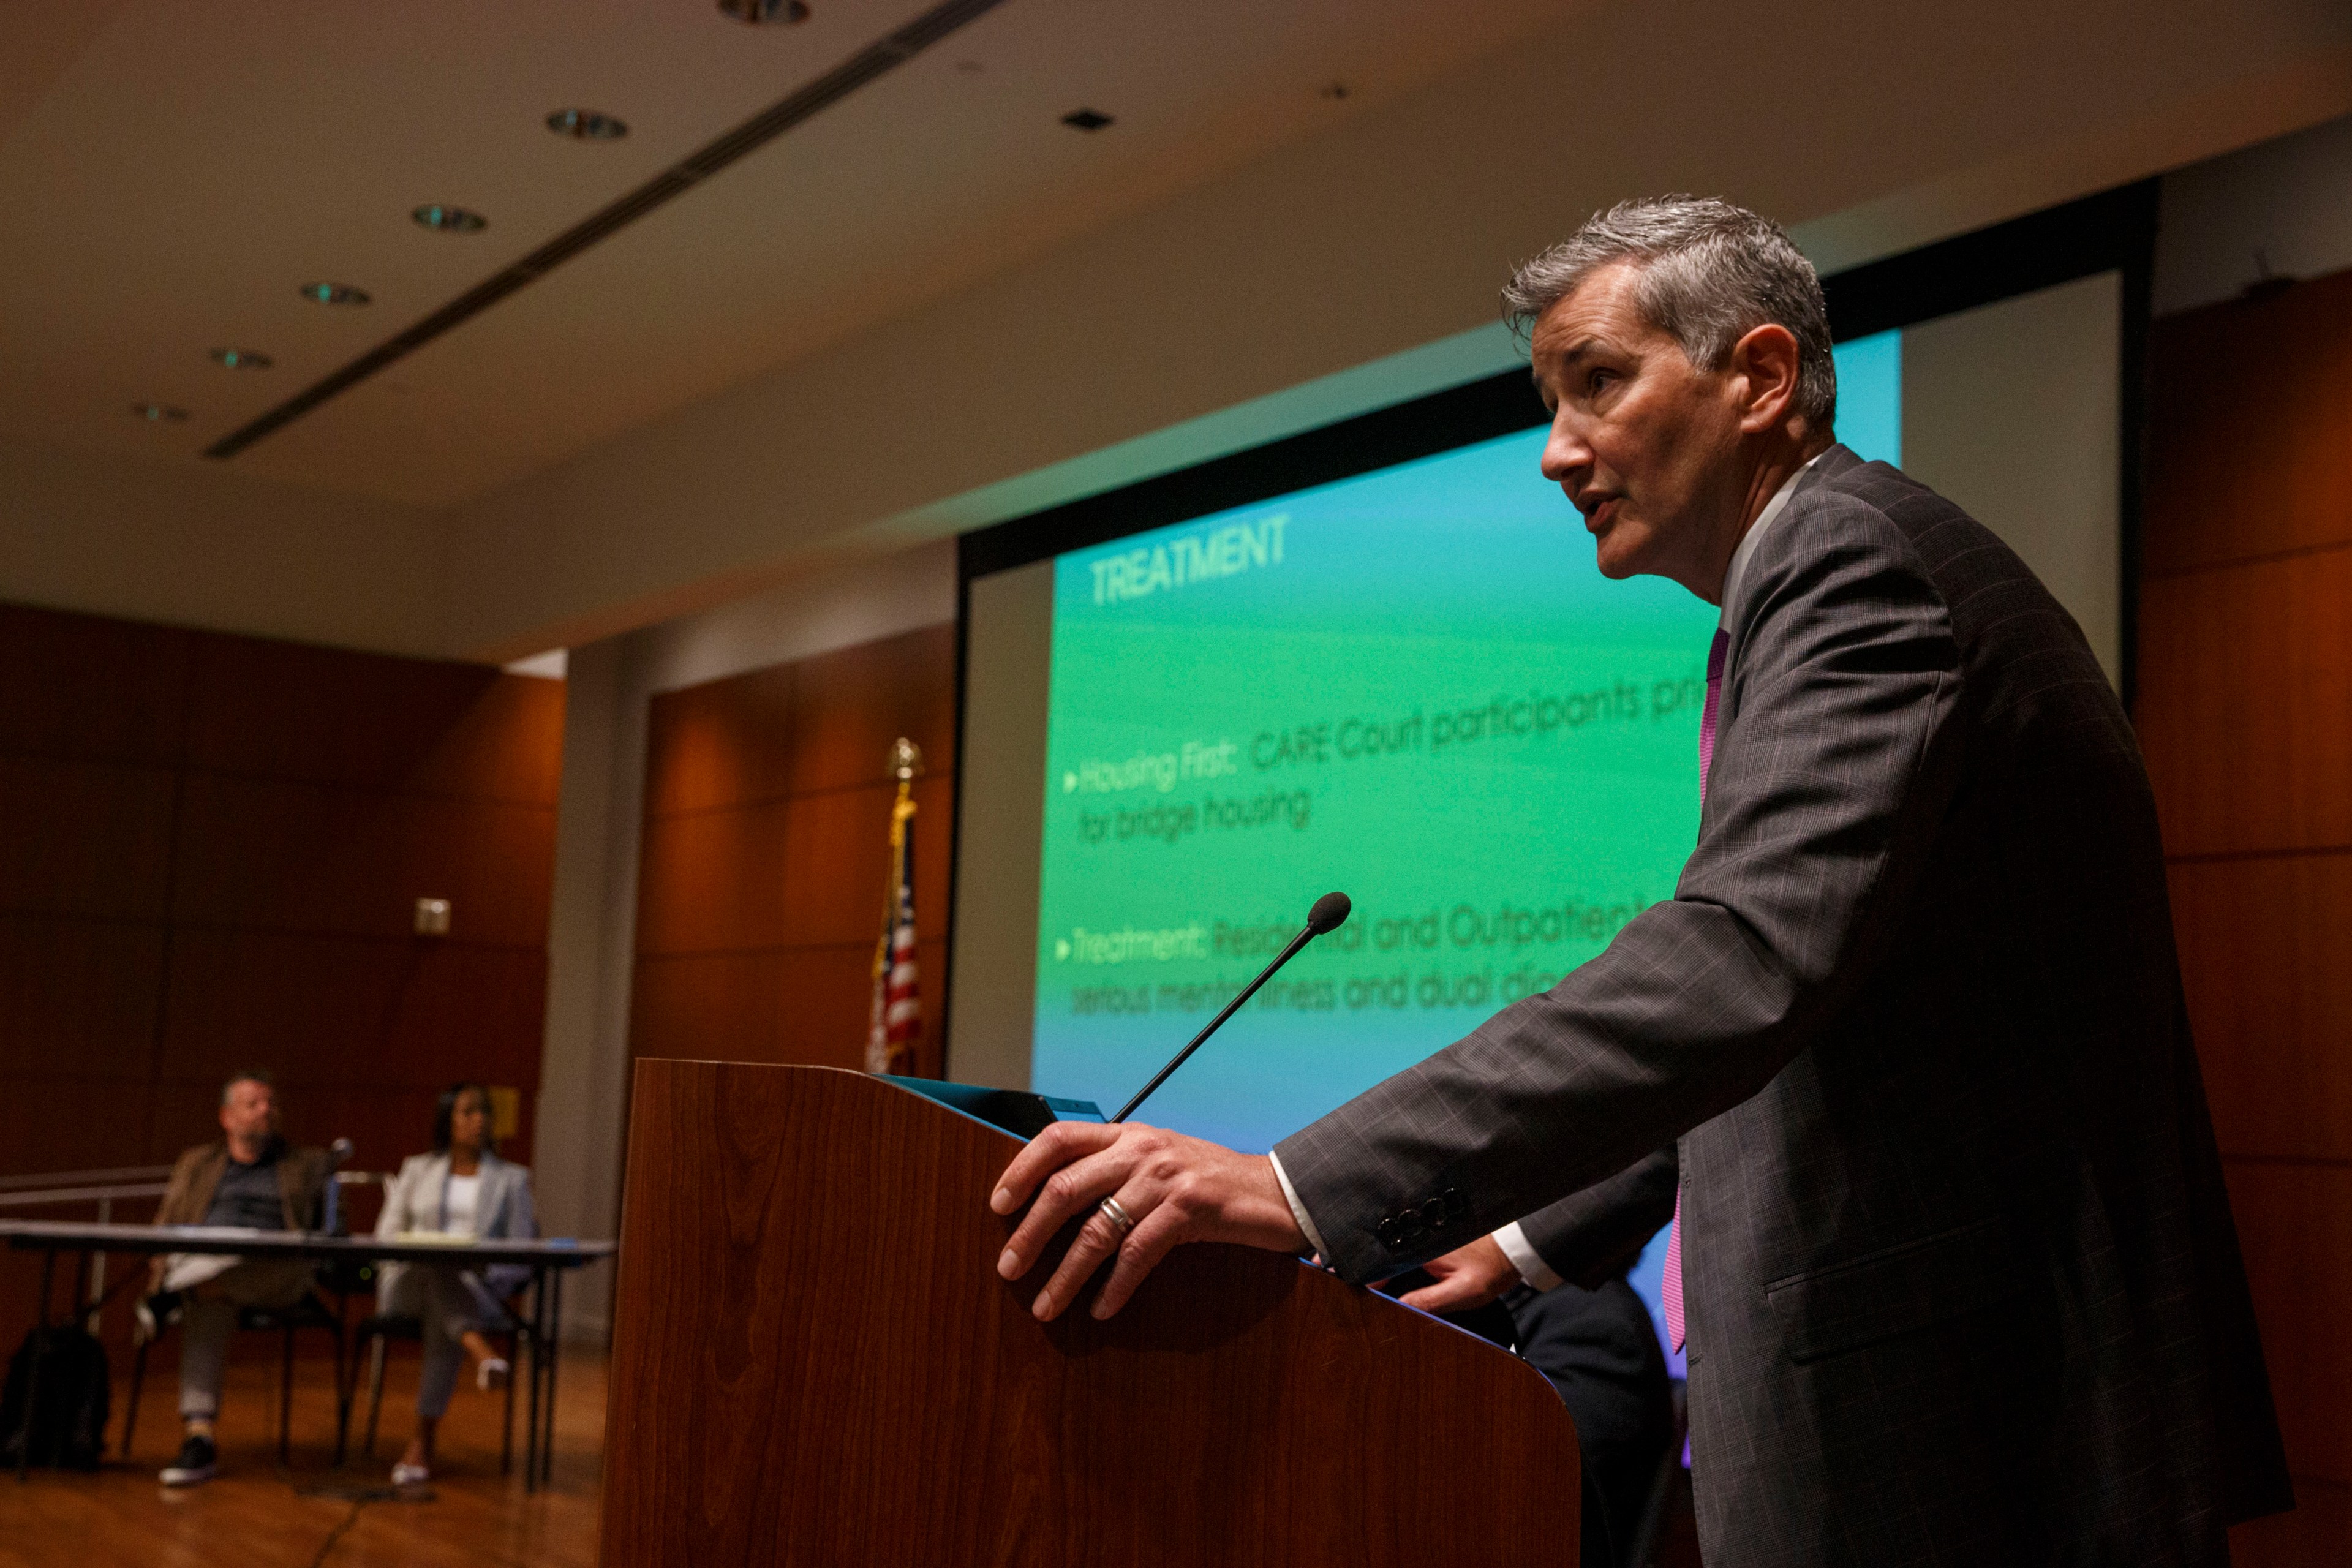 A man stands behind a podium in a lowly lit room and speak into a microphone. A screen is in the background and a title card read &quot;Treatment - Housing first: Care Court participants ...&quot;